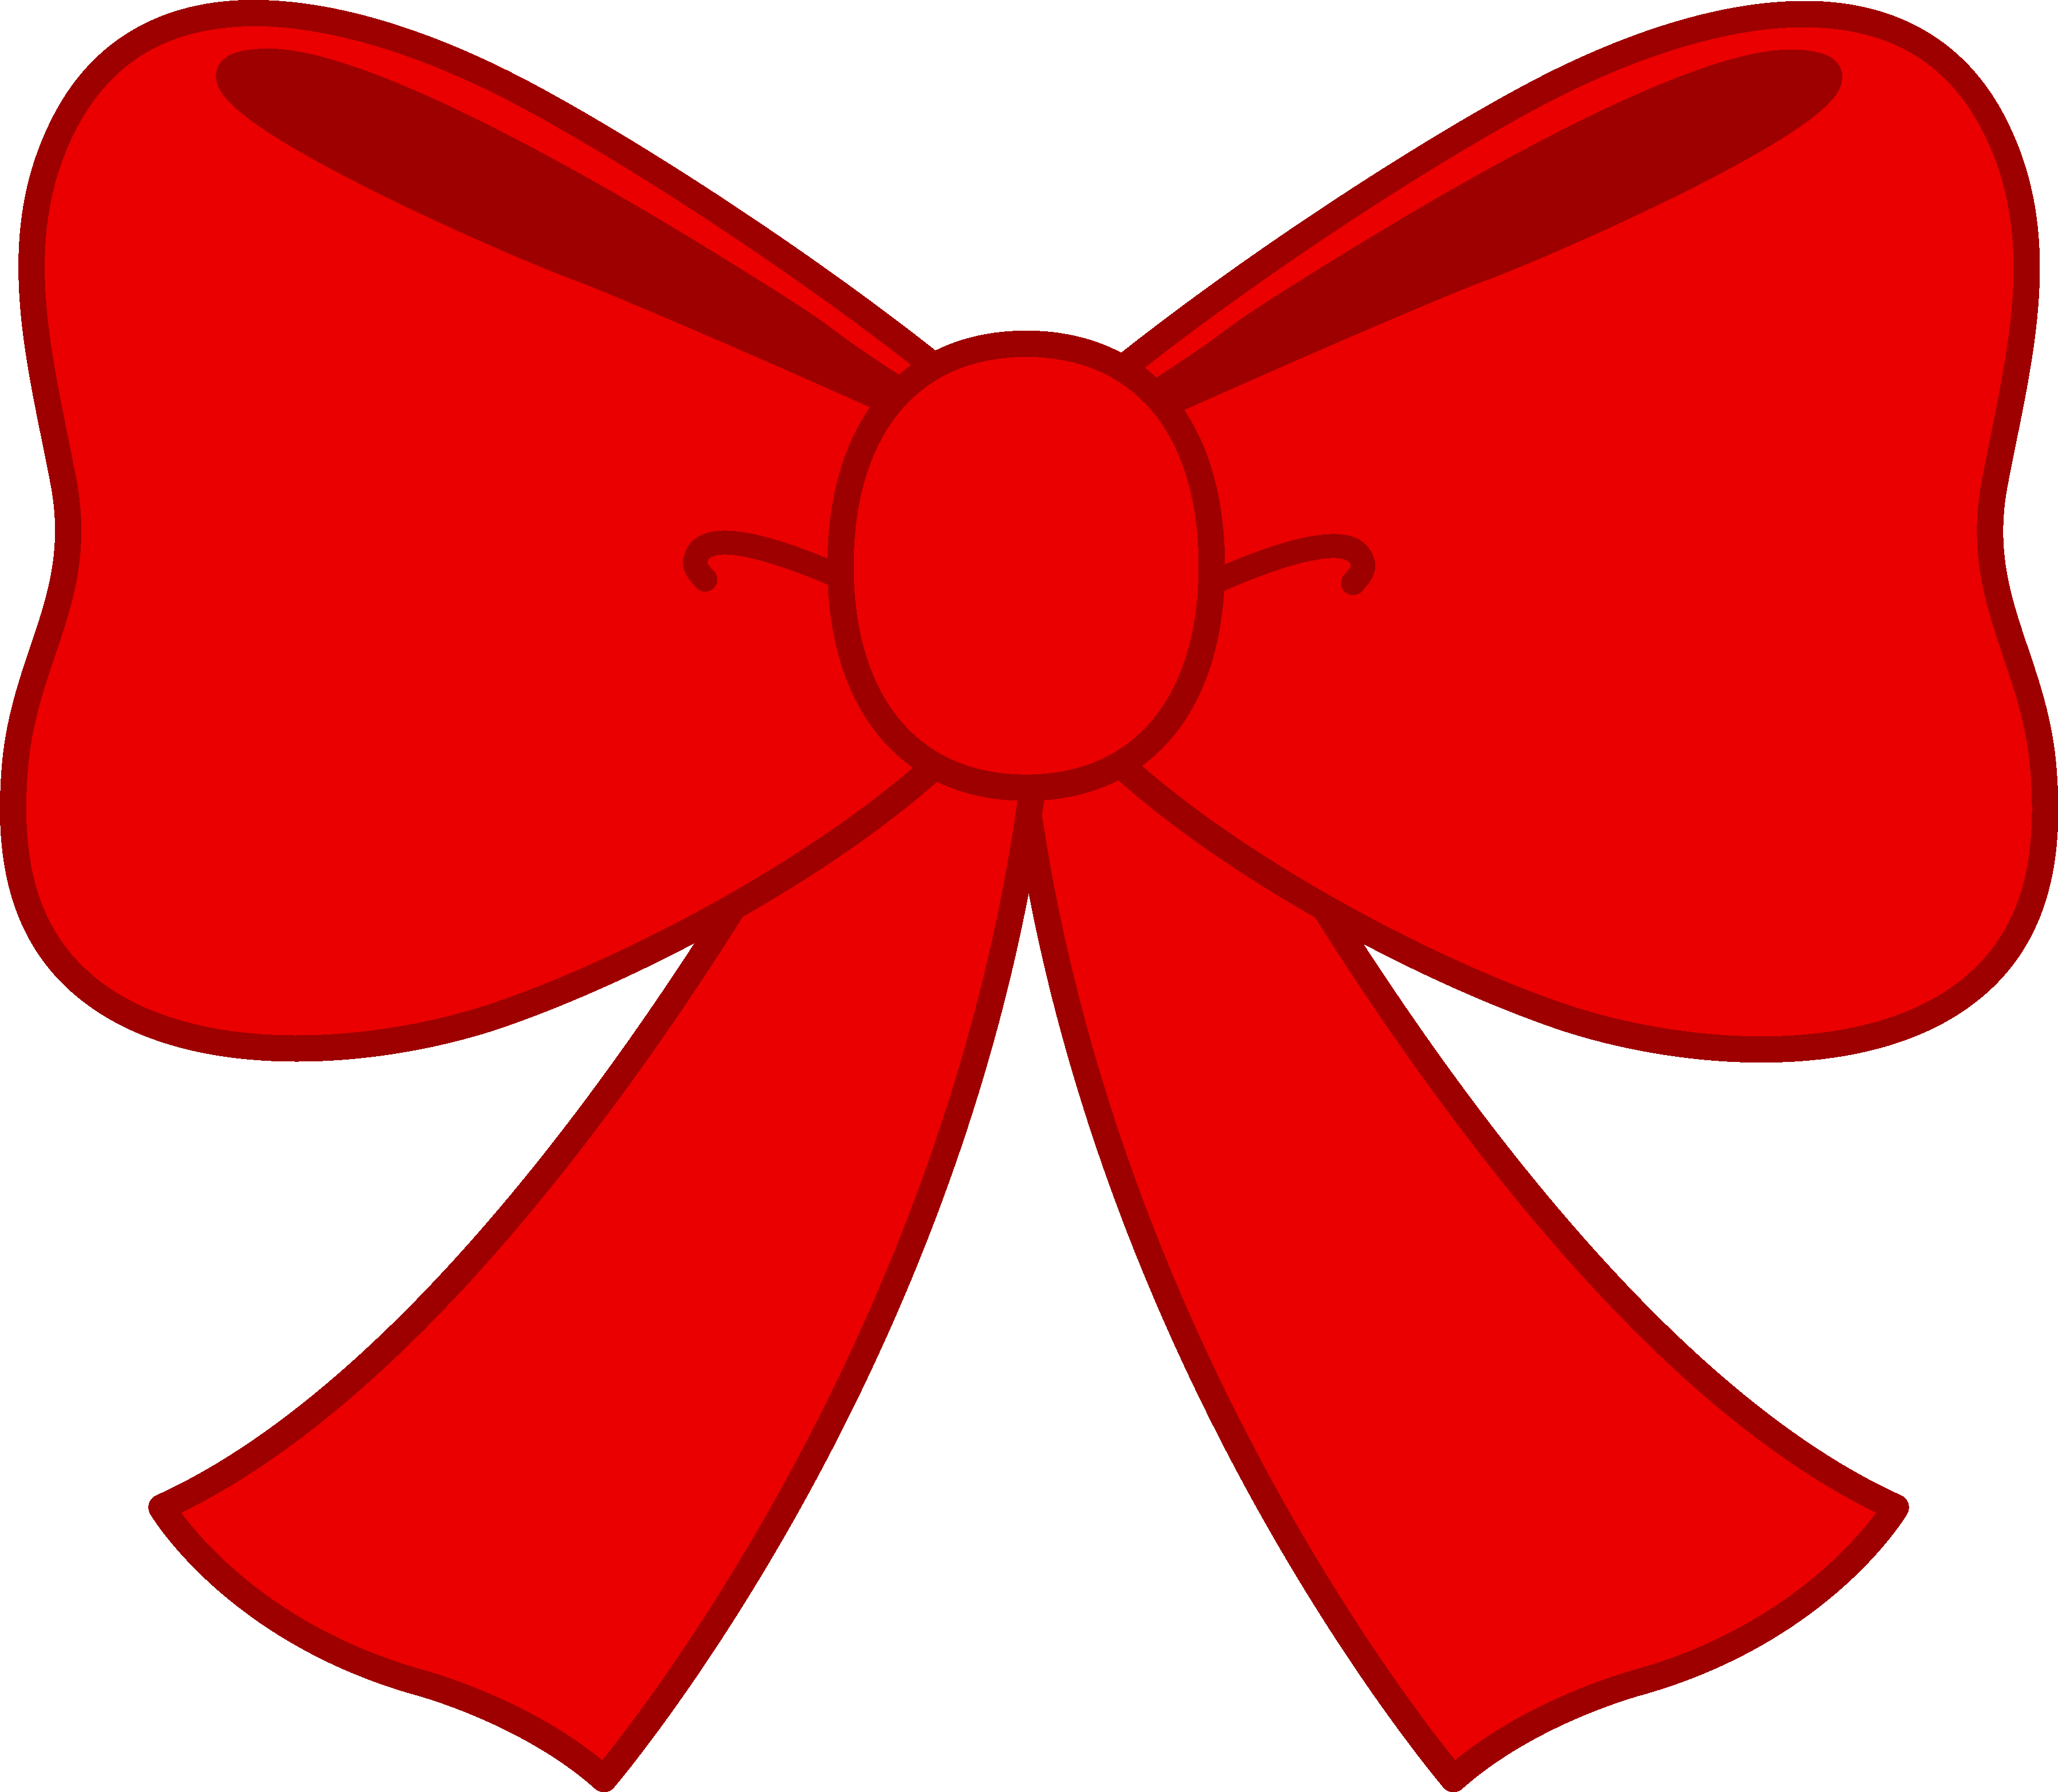 Red Bow Clipart - clipartall